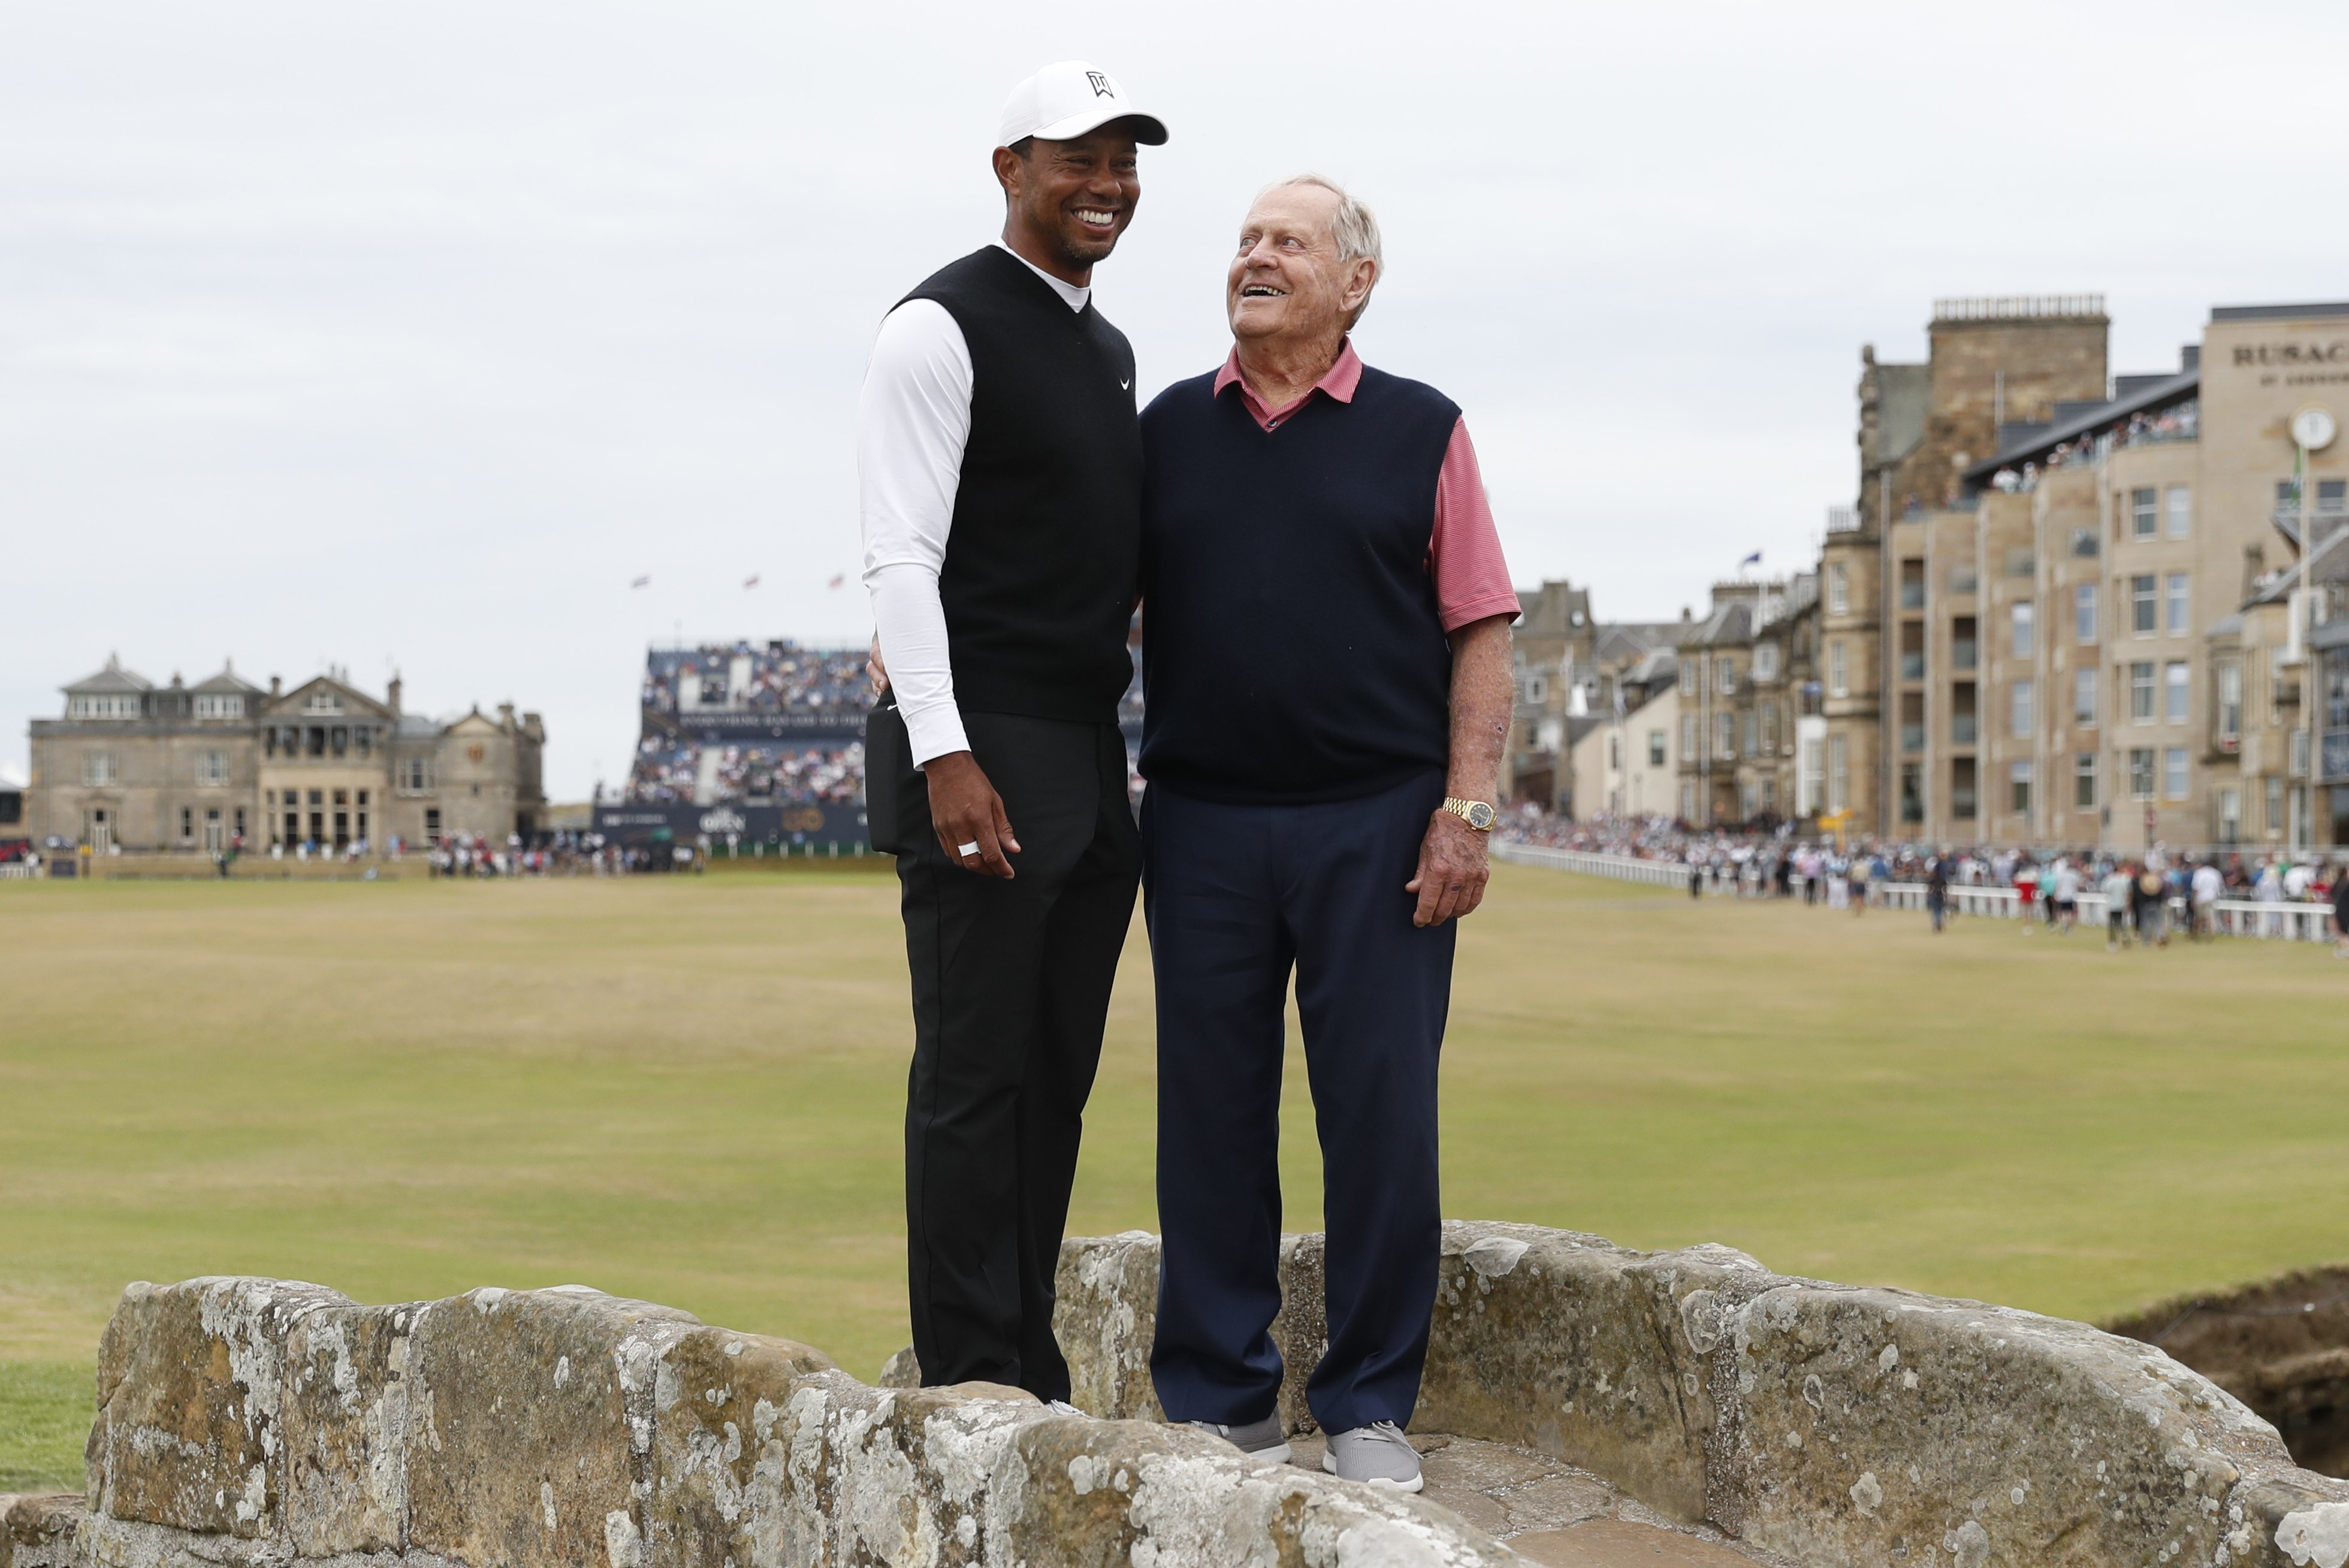 Is Golf's Dress Code Outdated?